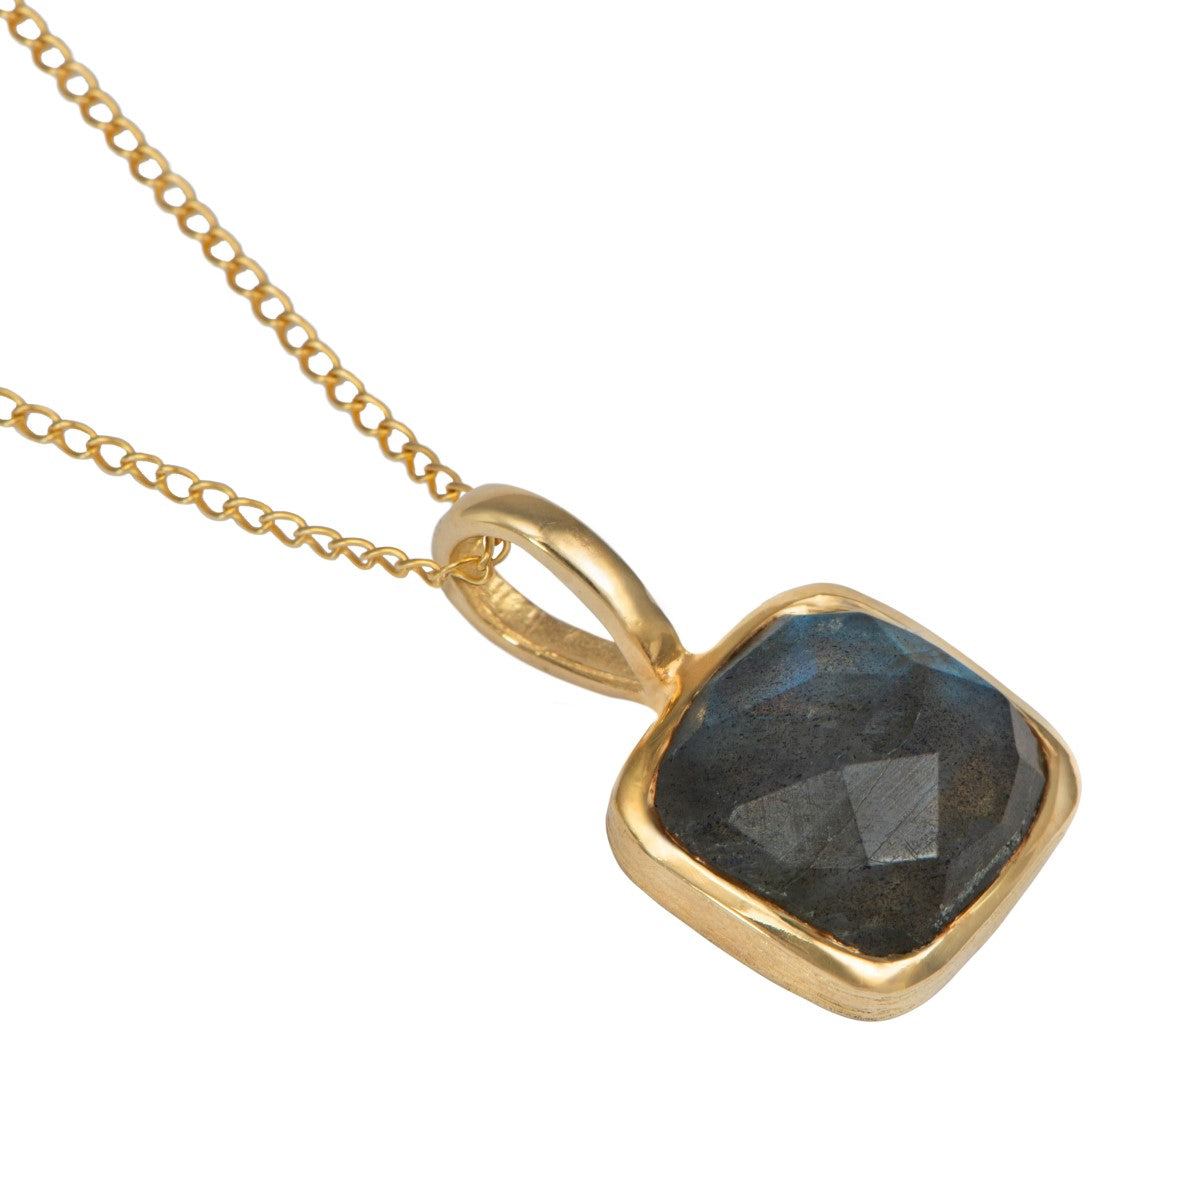 Gold Plated Sterling Silver Pendant Necklace with a Faceted Square Gemstone - Labradorite